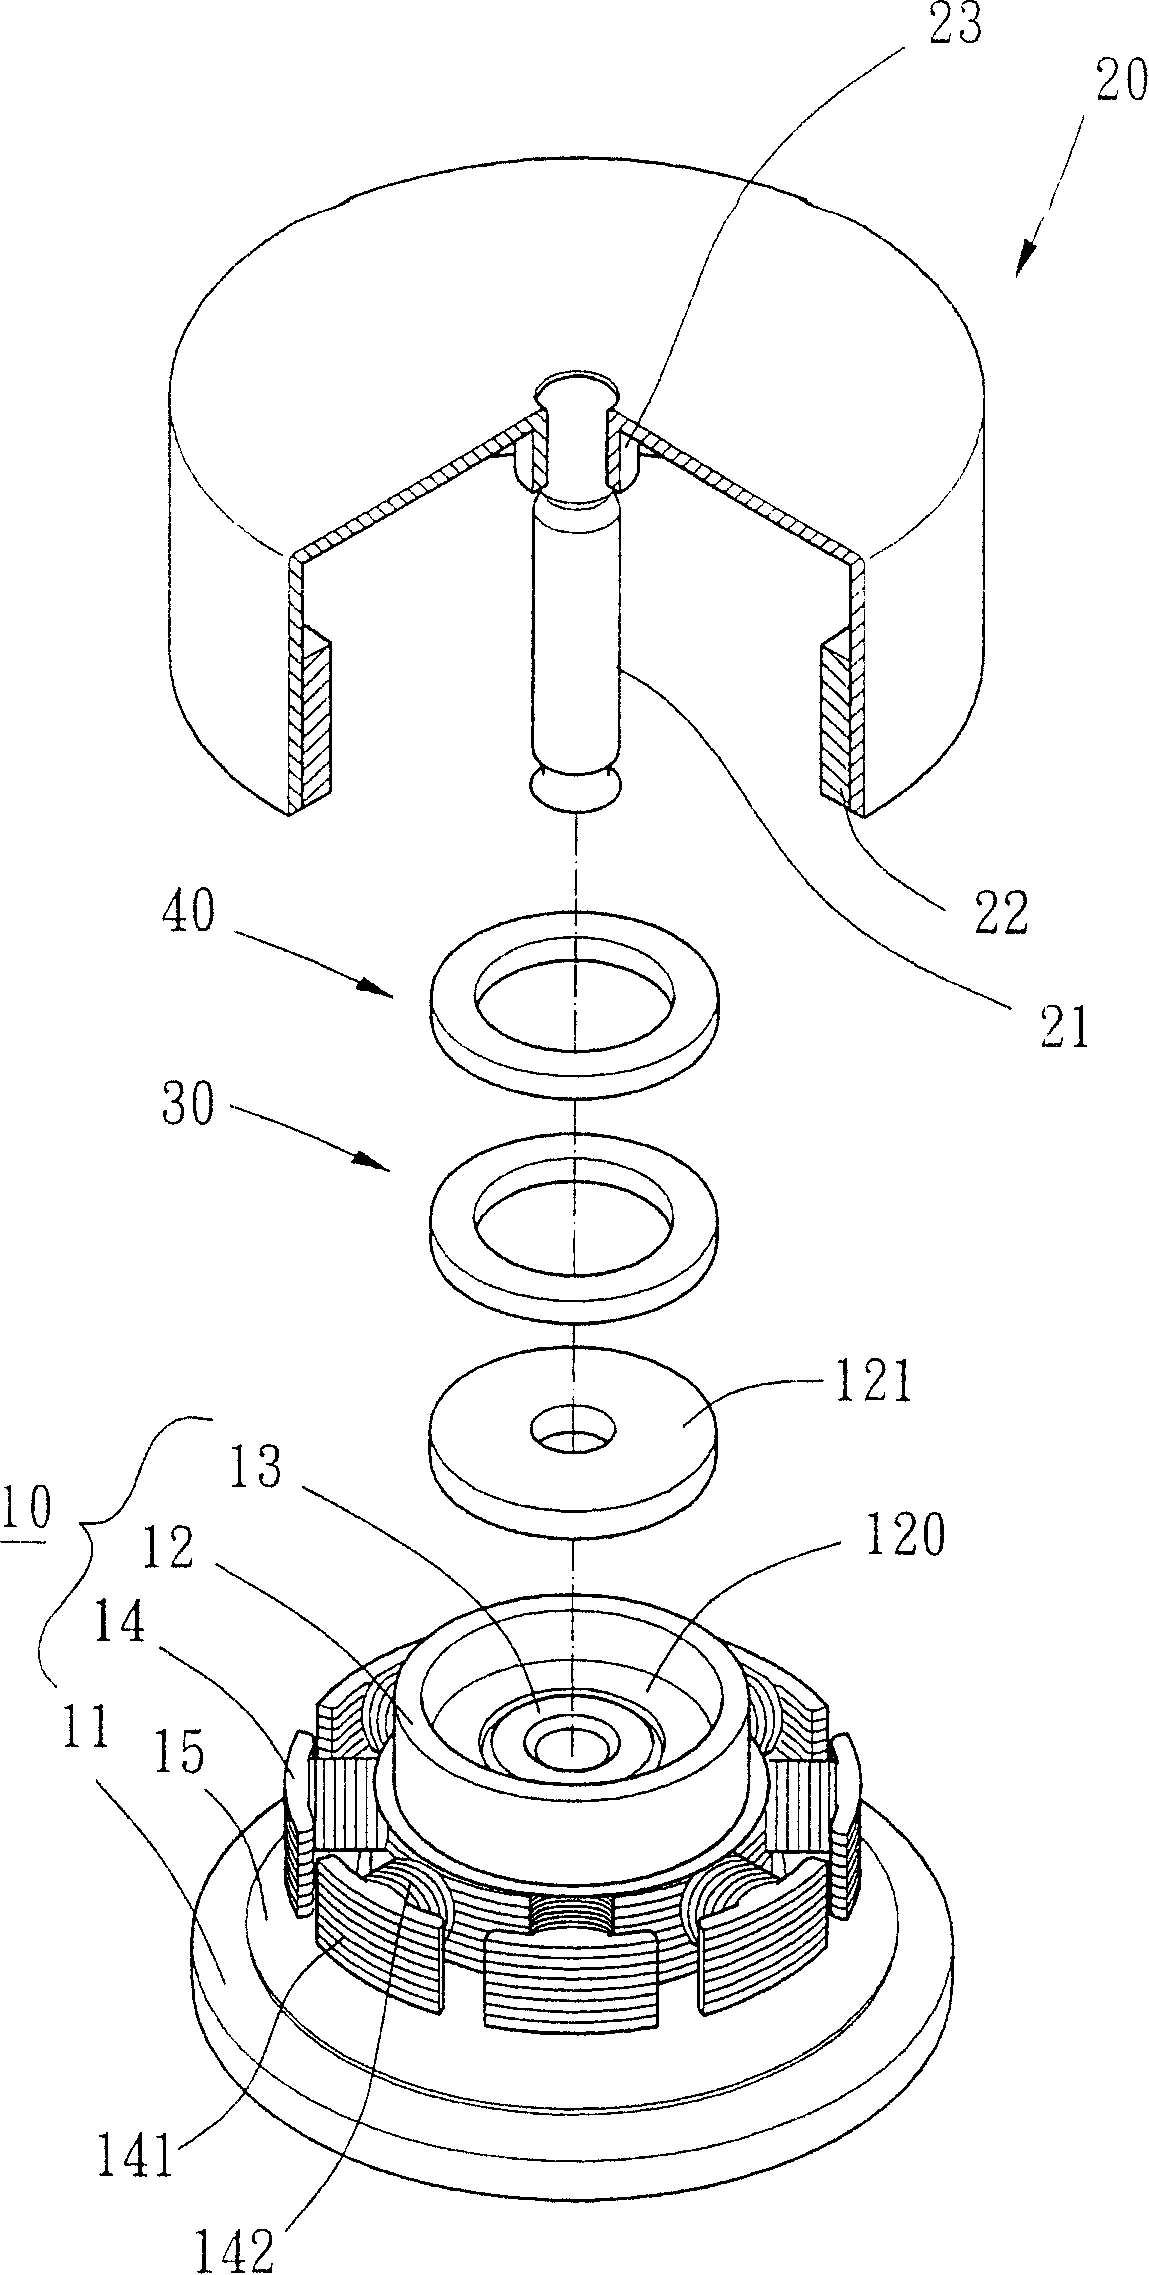 Rotor balance structure of motor